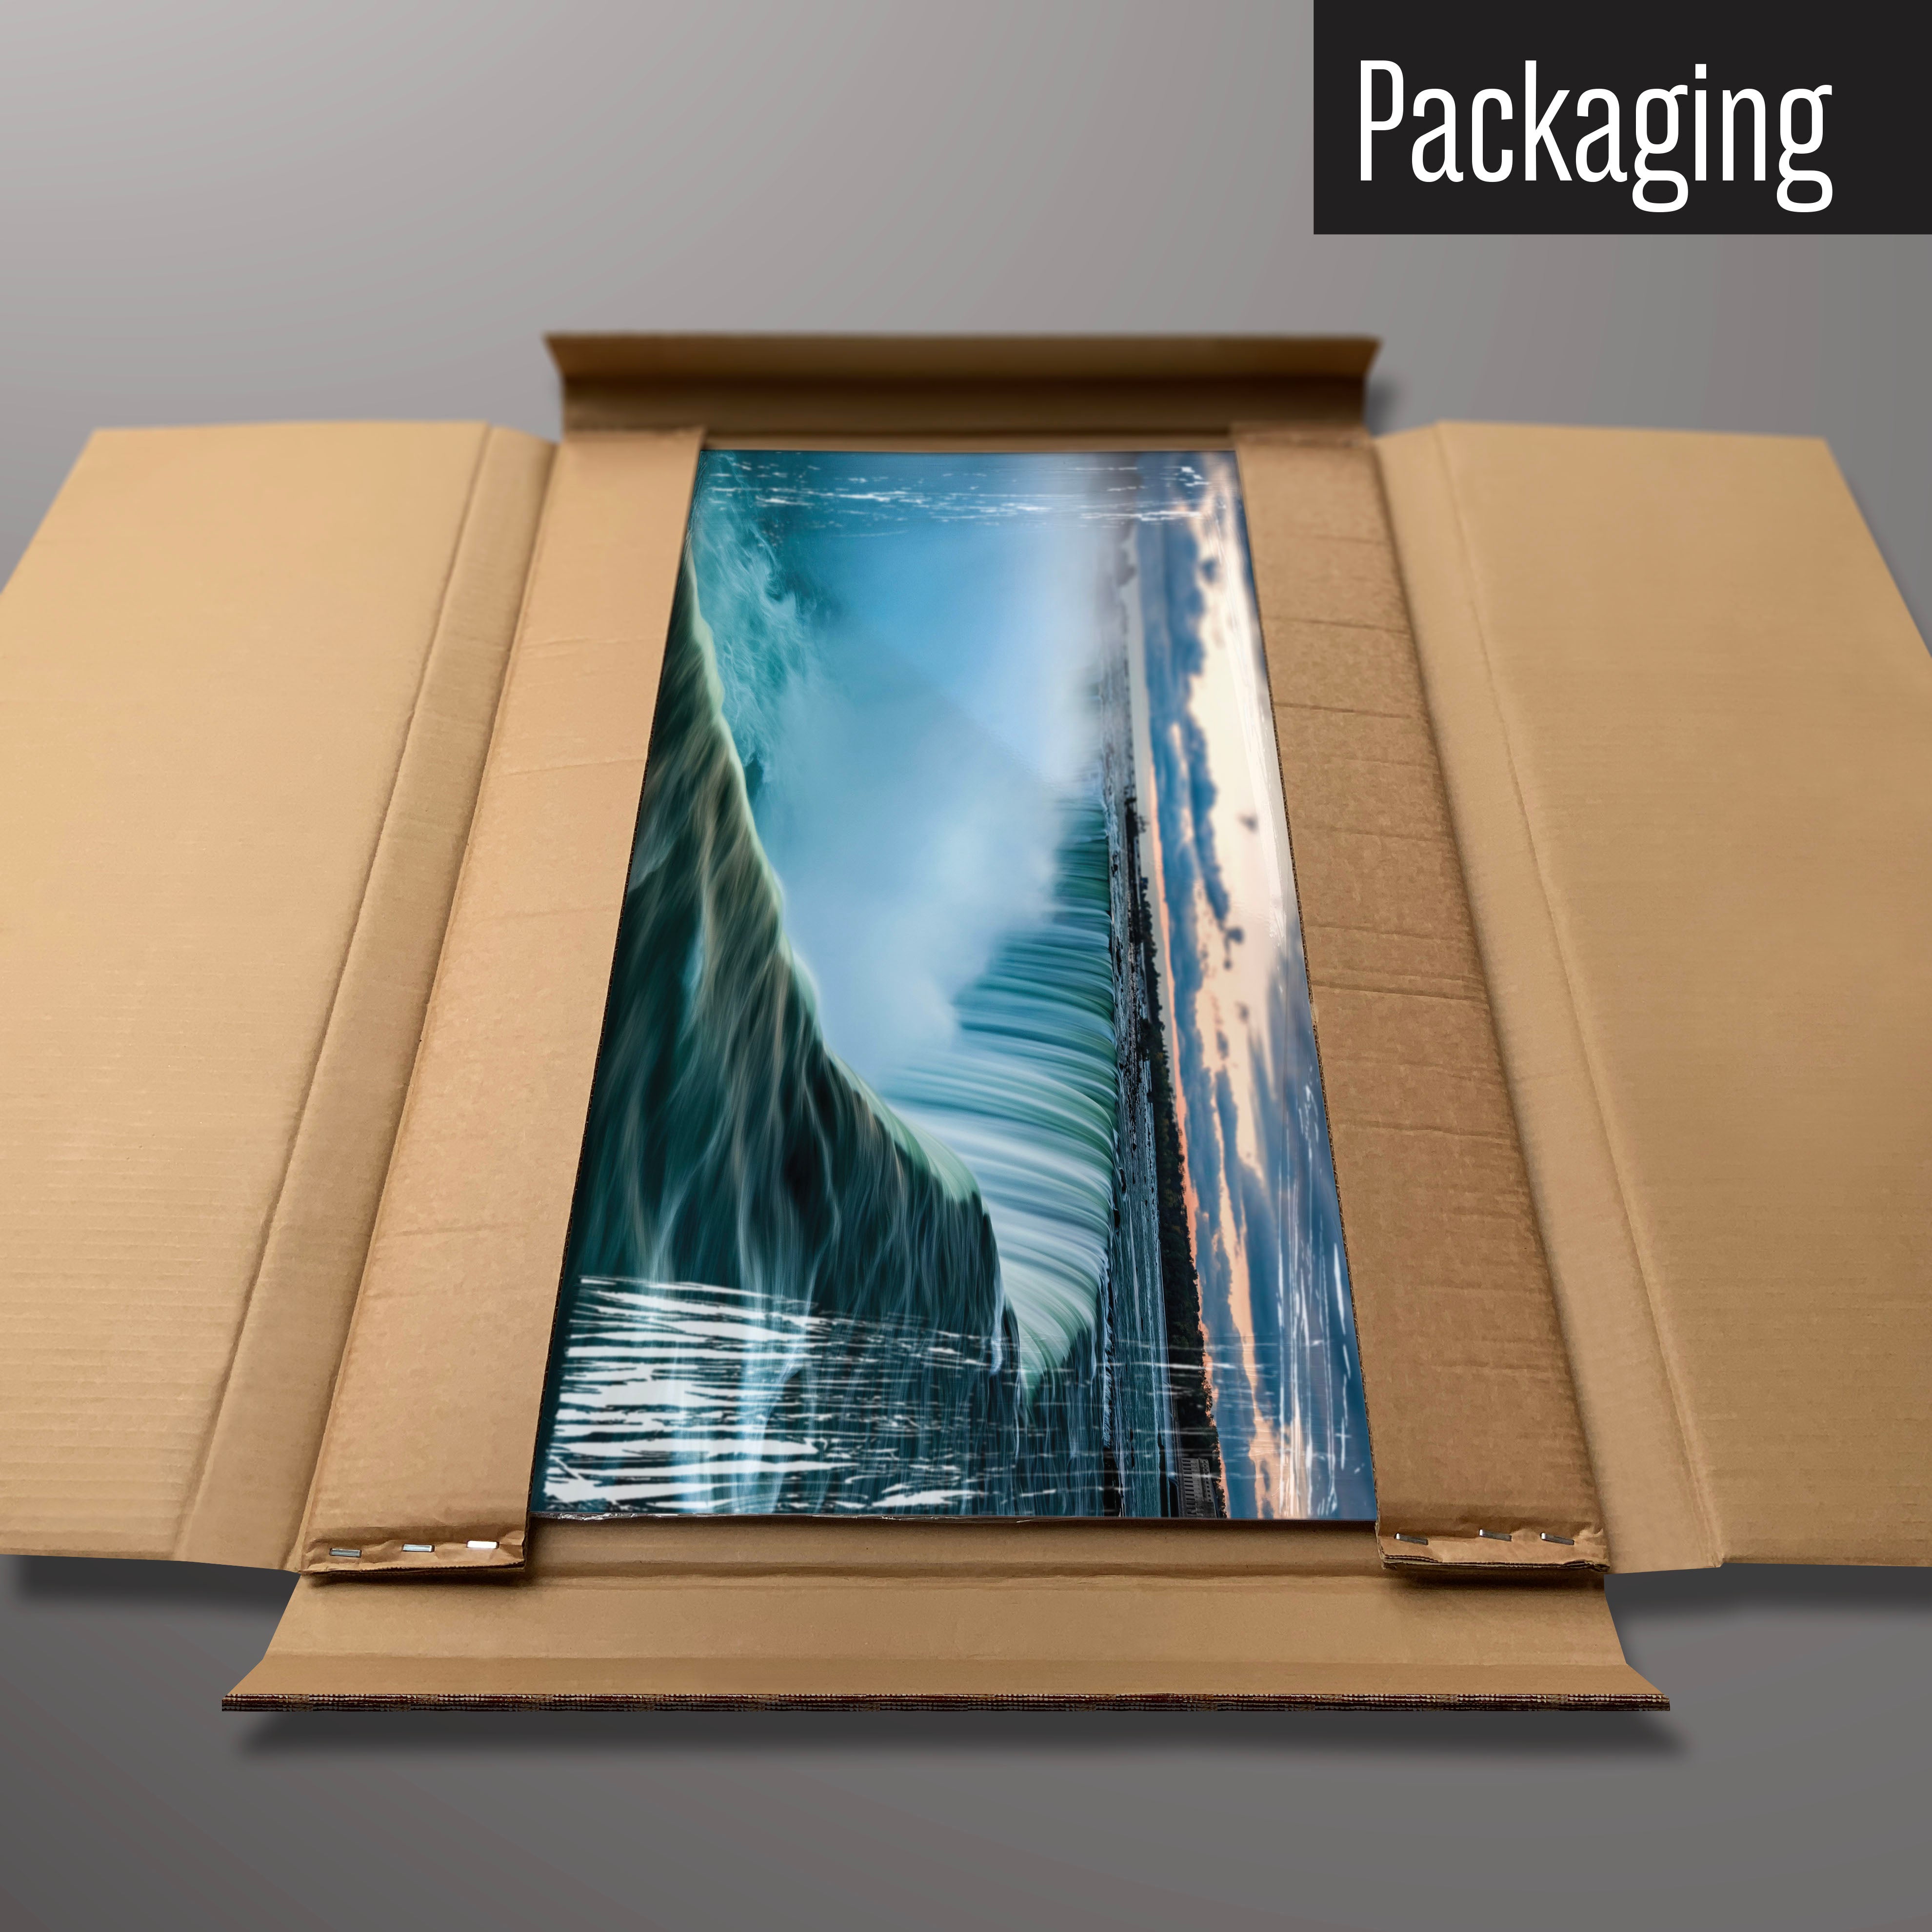 A Niagara Falls photographic magnetic board in it’s cardboard packaging